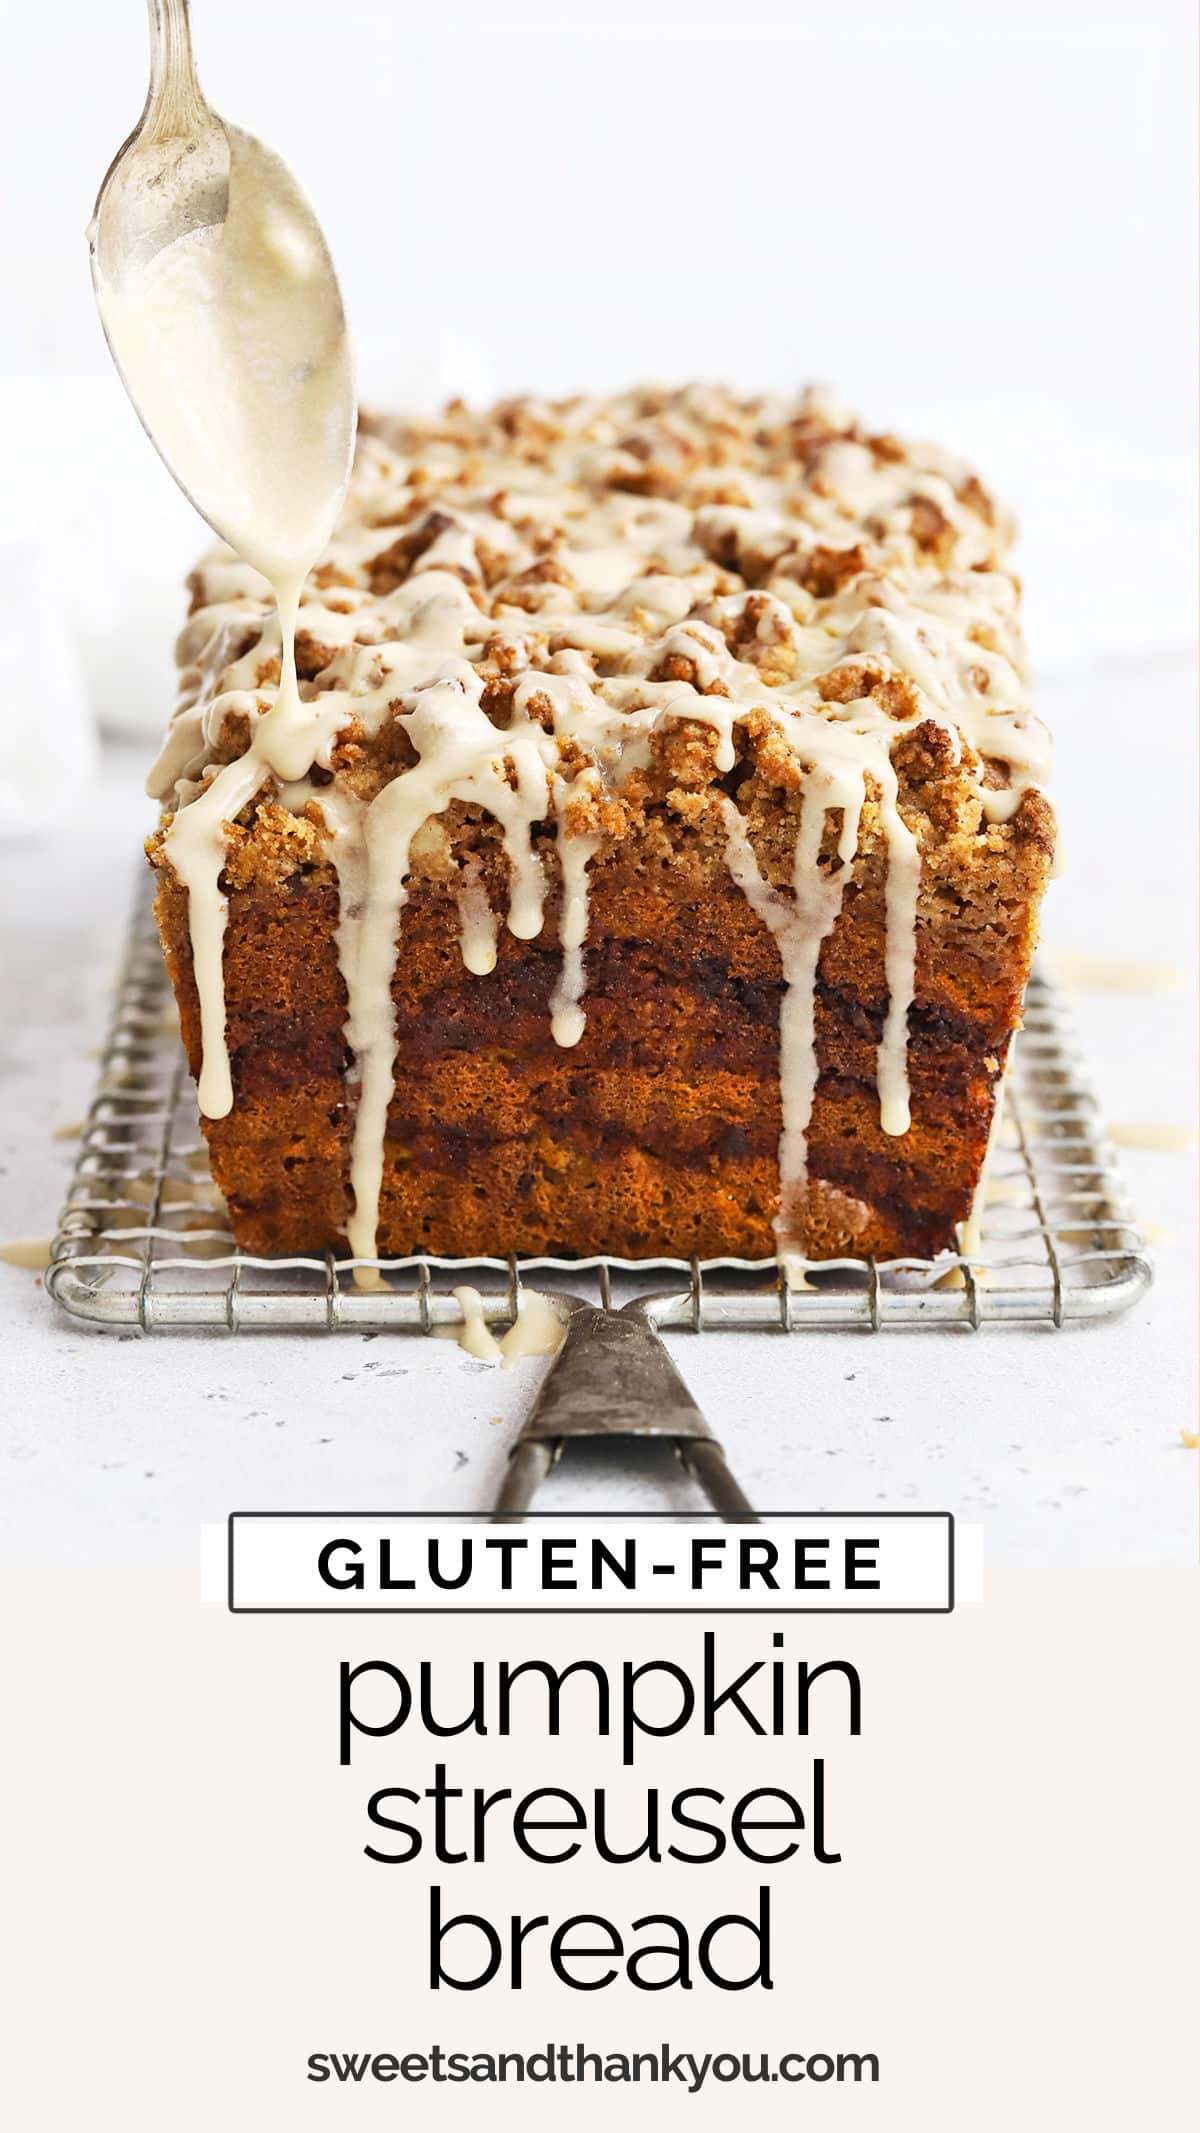 Gluten-Free Pumpkin Streusel Bread With Maple Glaze - This amazing gluten-free cinnamon swirl pumpkin bread is topped with a buttery crumble and sweet maple glaze. It's THE BEST gluten-free pumpkin bread recipe ever! // Cinnamon Swirl Pumpkin Bread Recipe // Maple Pumpkin Bread // Maple Glaze Pumpkin Bread // Glazed Pumpkin Bread // Gluten-Free Quick Bread // 